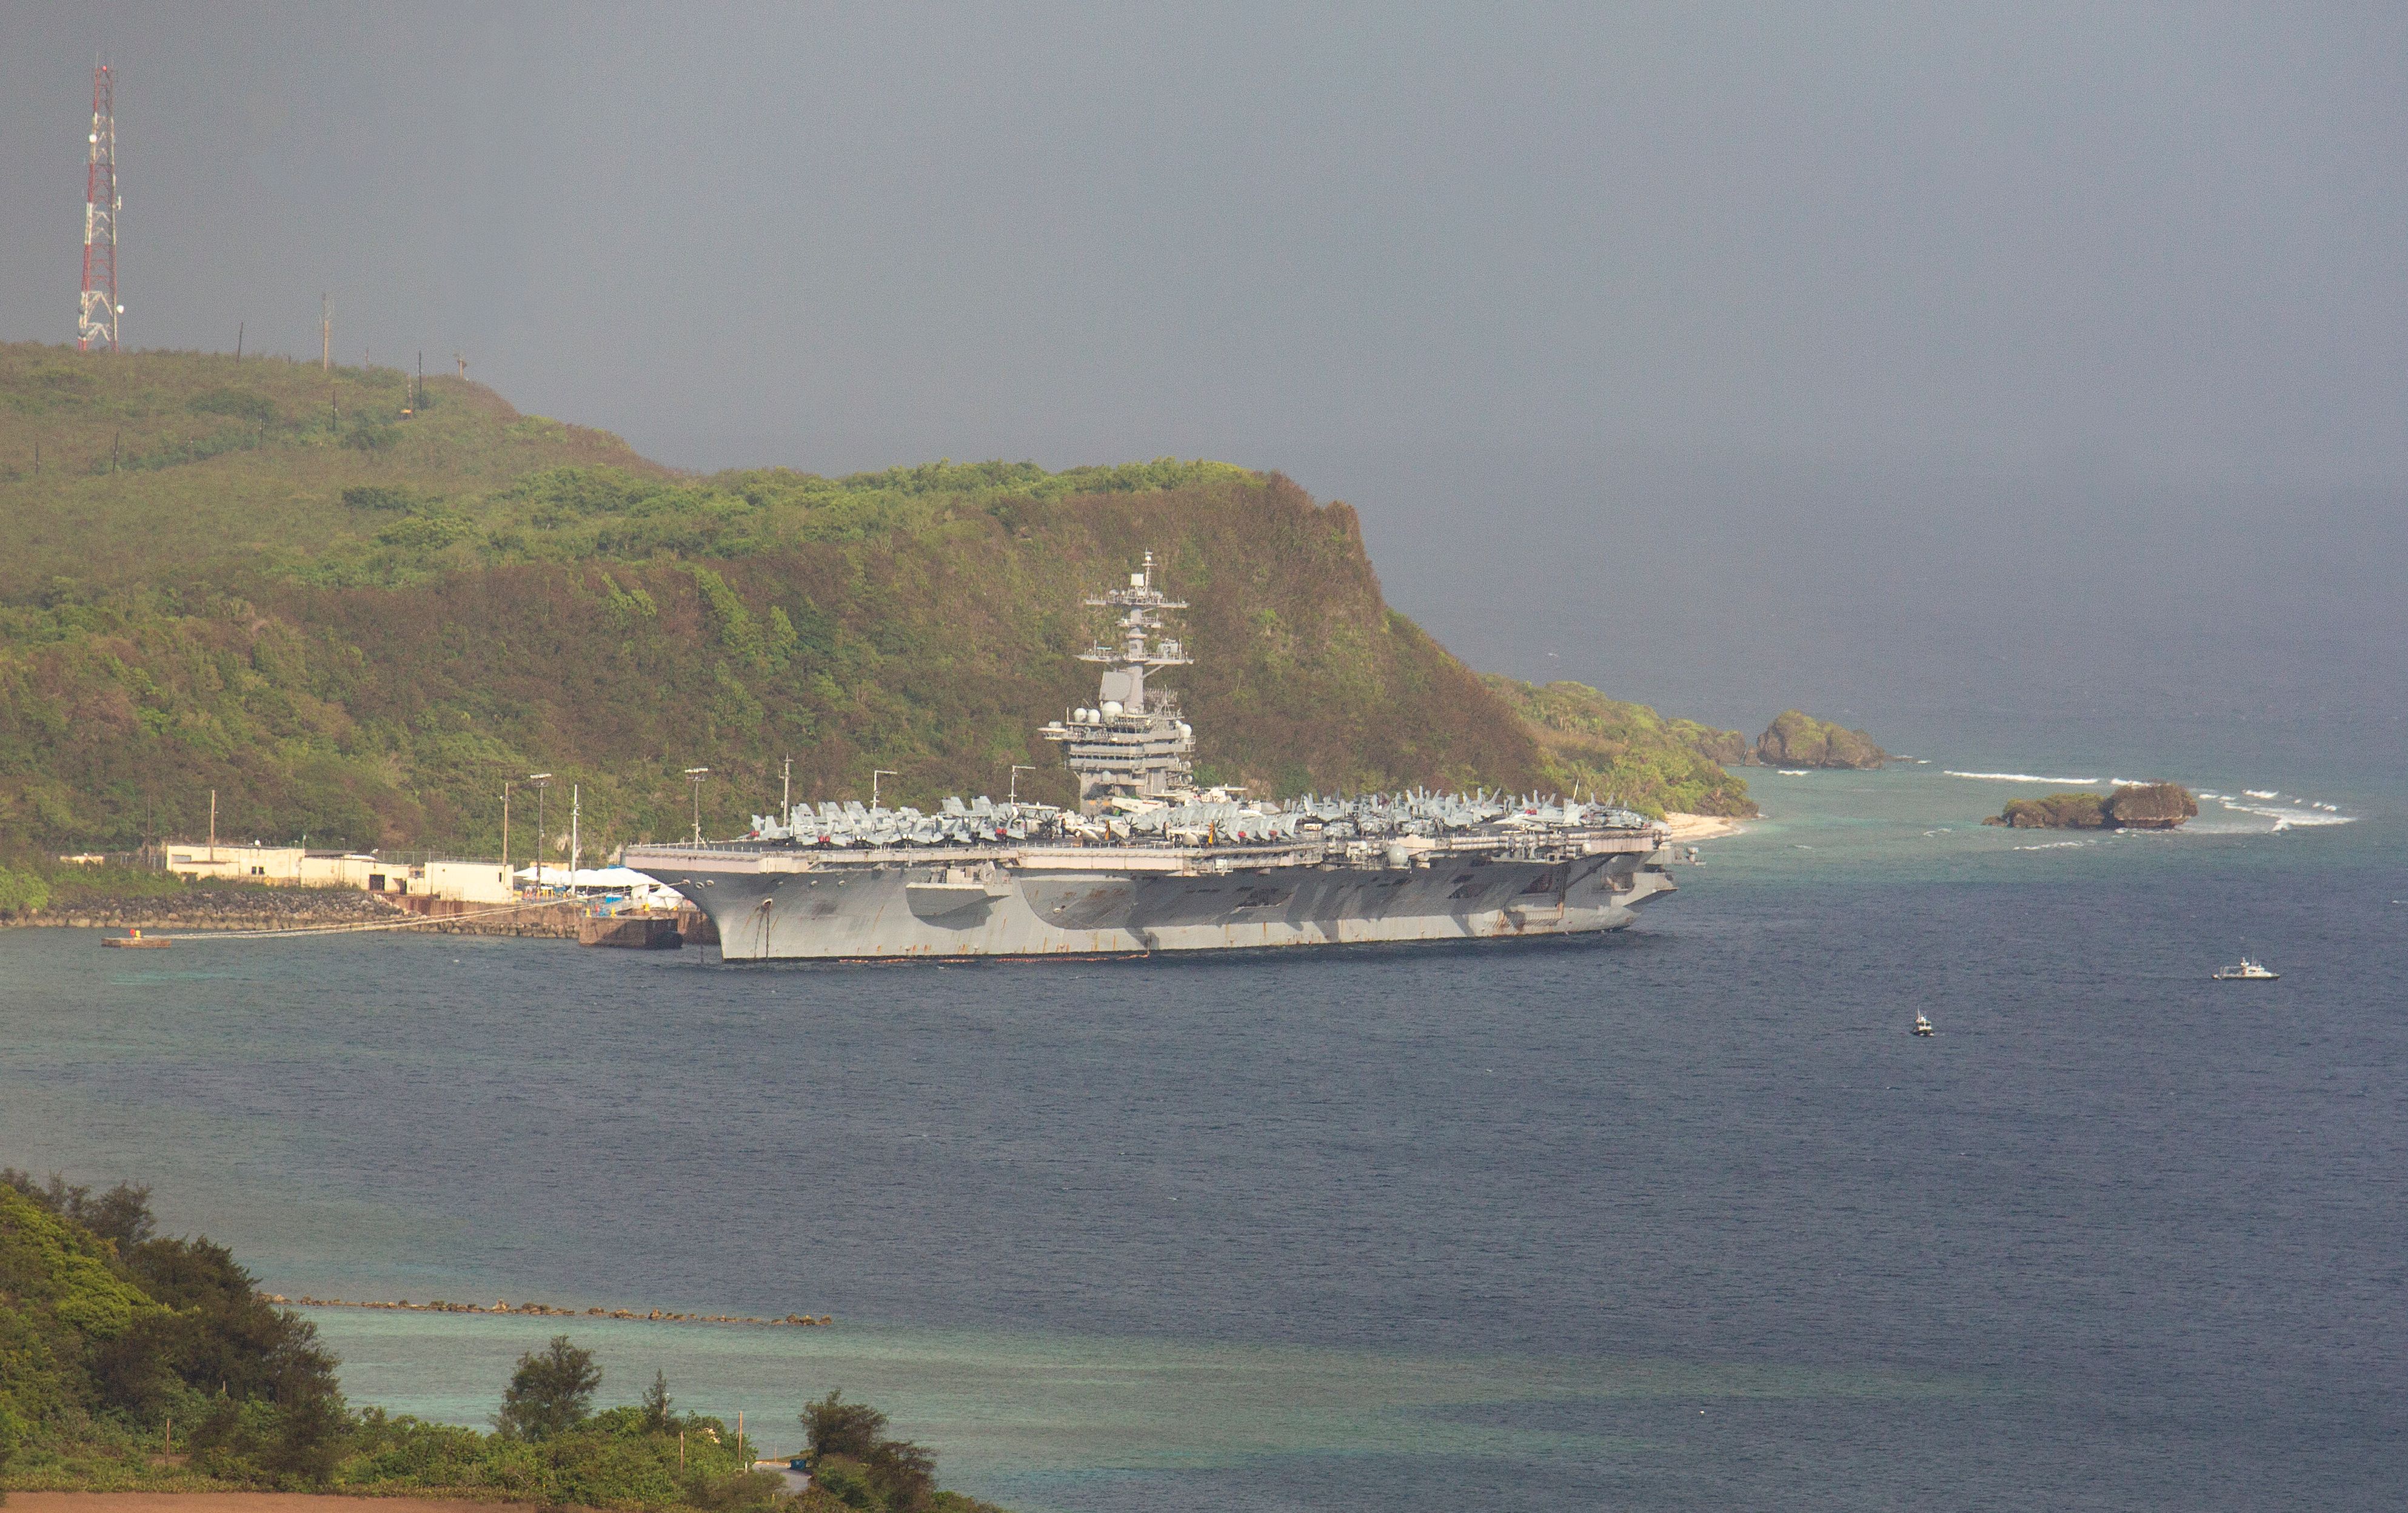 The USS Theodore Roosevelt docked at Naval Base Guam in Apra Harbor on April 27.